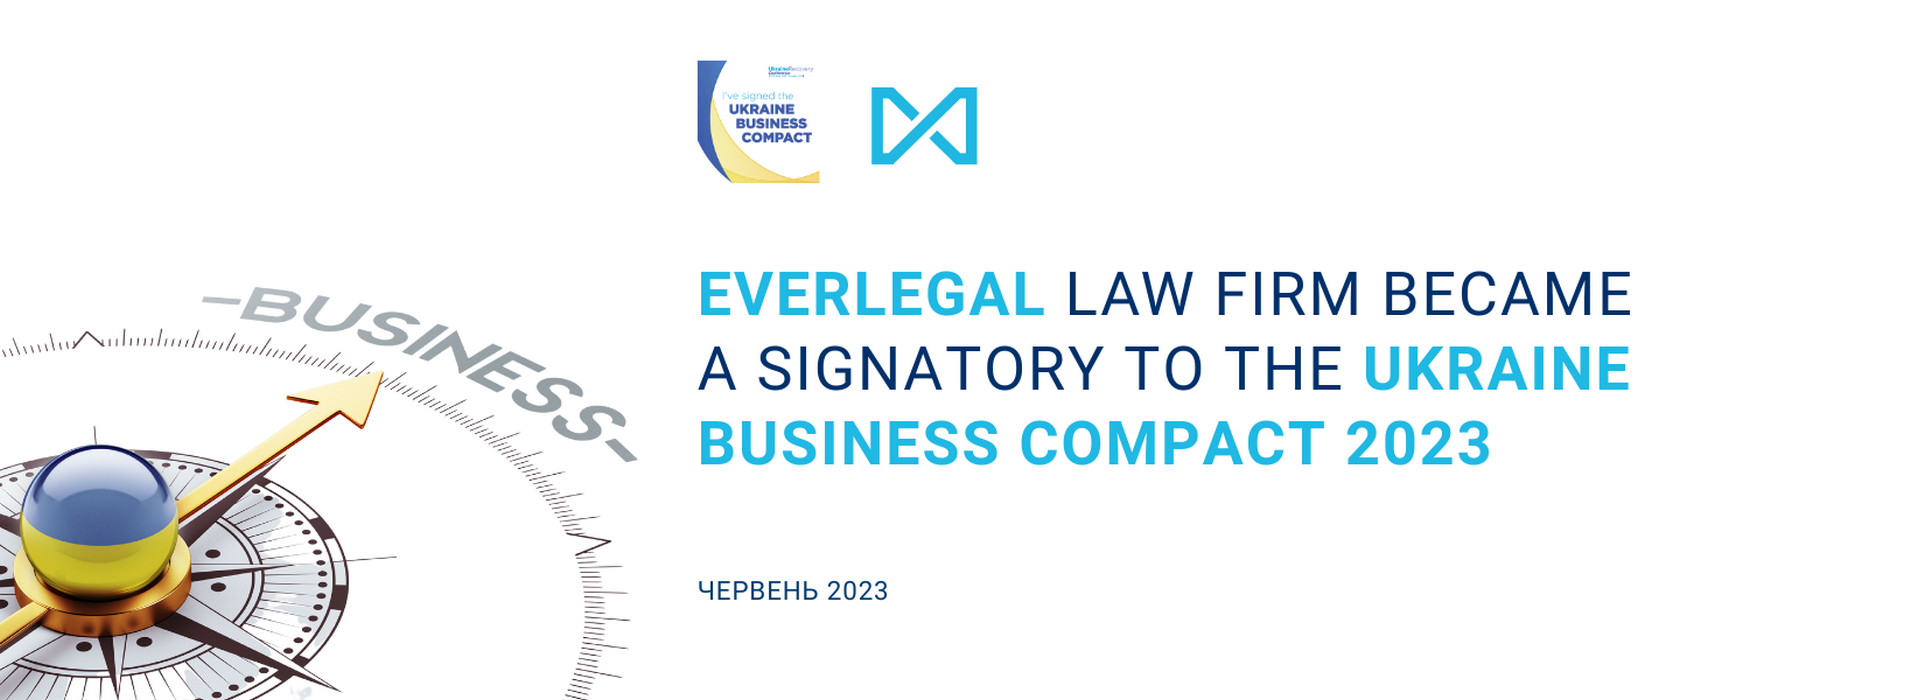 EVERLEGAL Law Firm Became a Signatory to the Ukraine Business Compact 2023